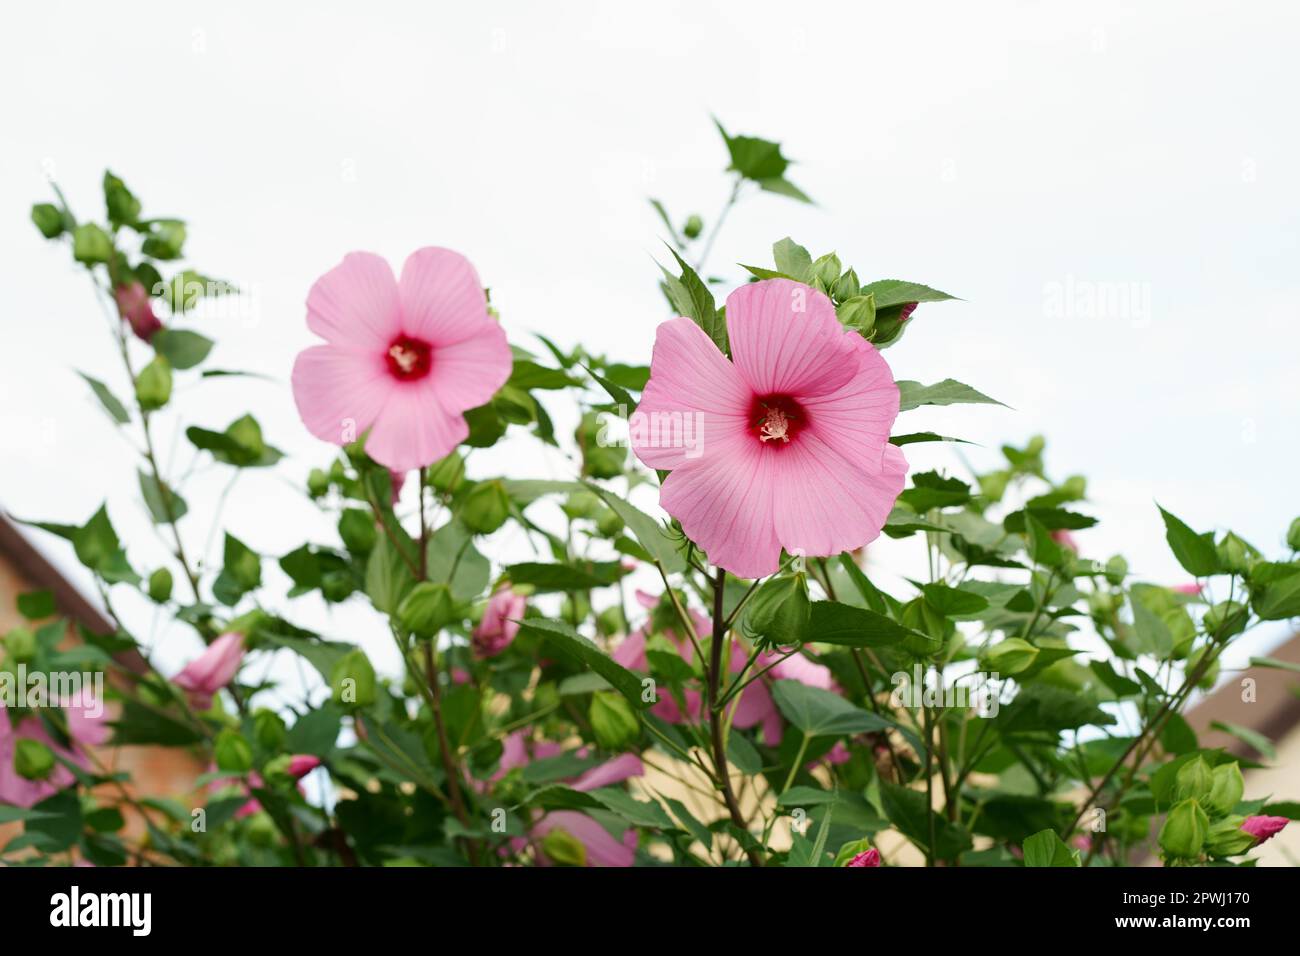 A large purple hibiscus flower on a floral background hibiscus moscheutos . Rose Mallow Stock Photo